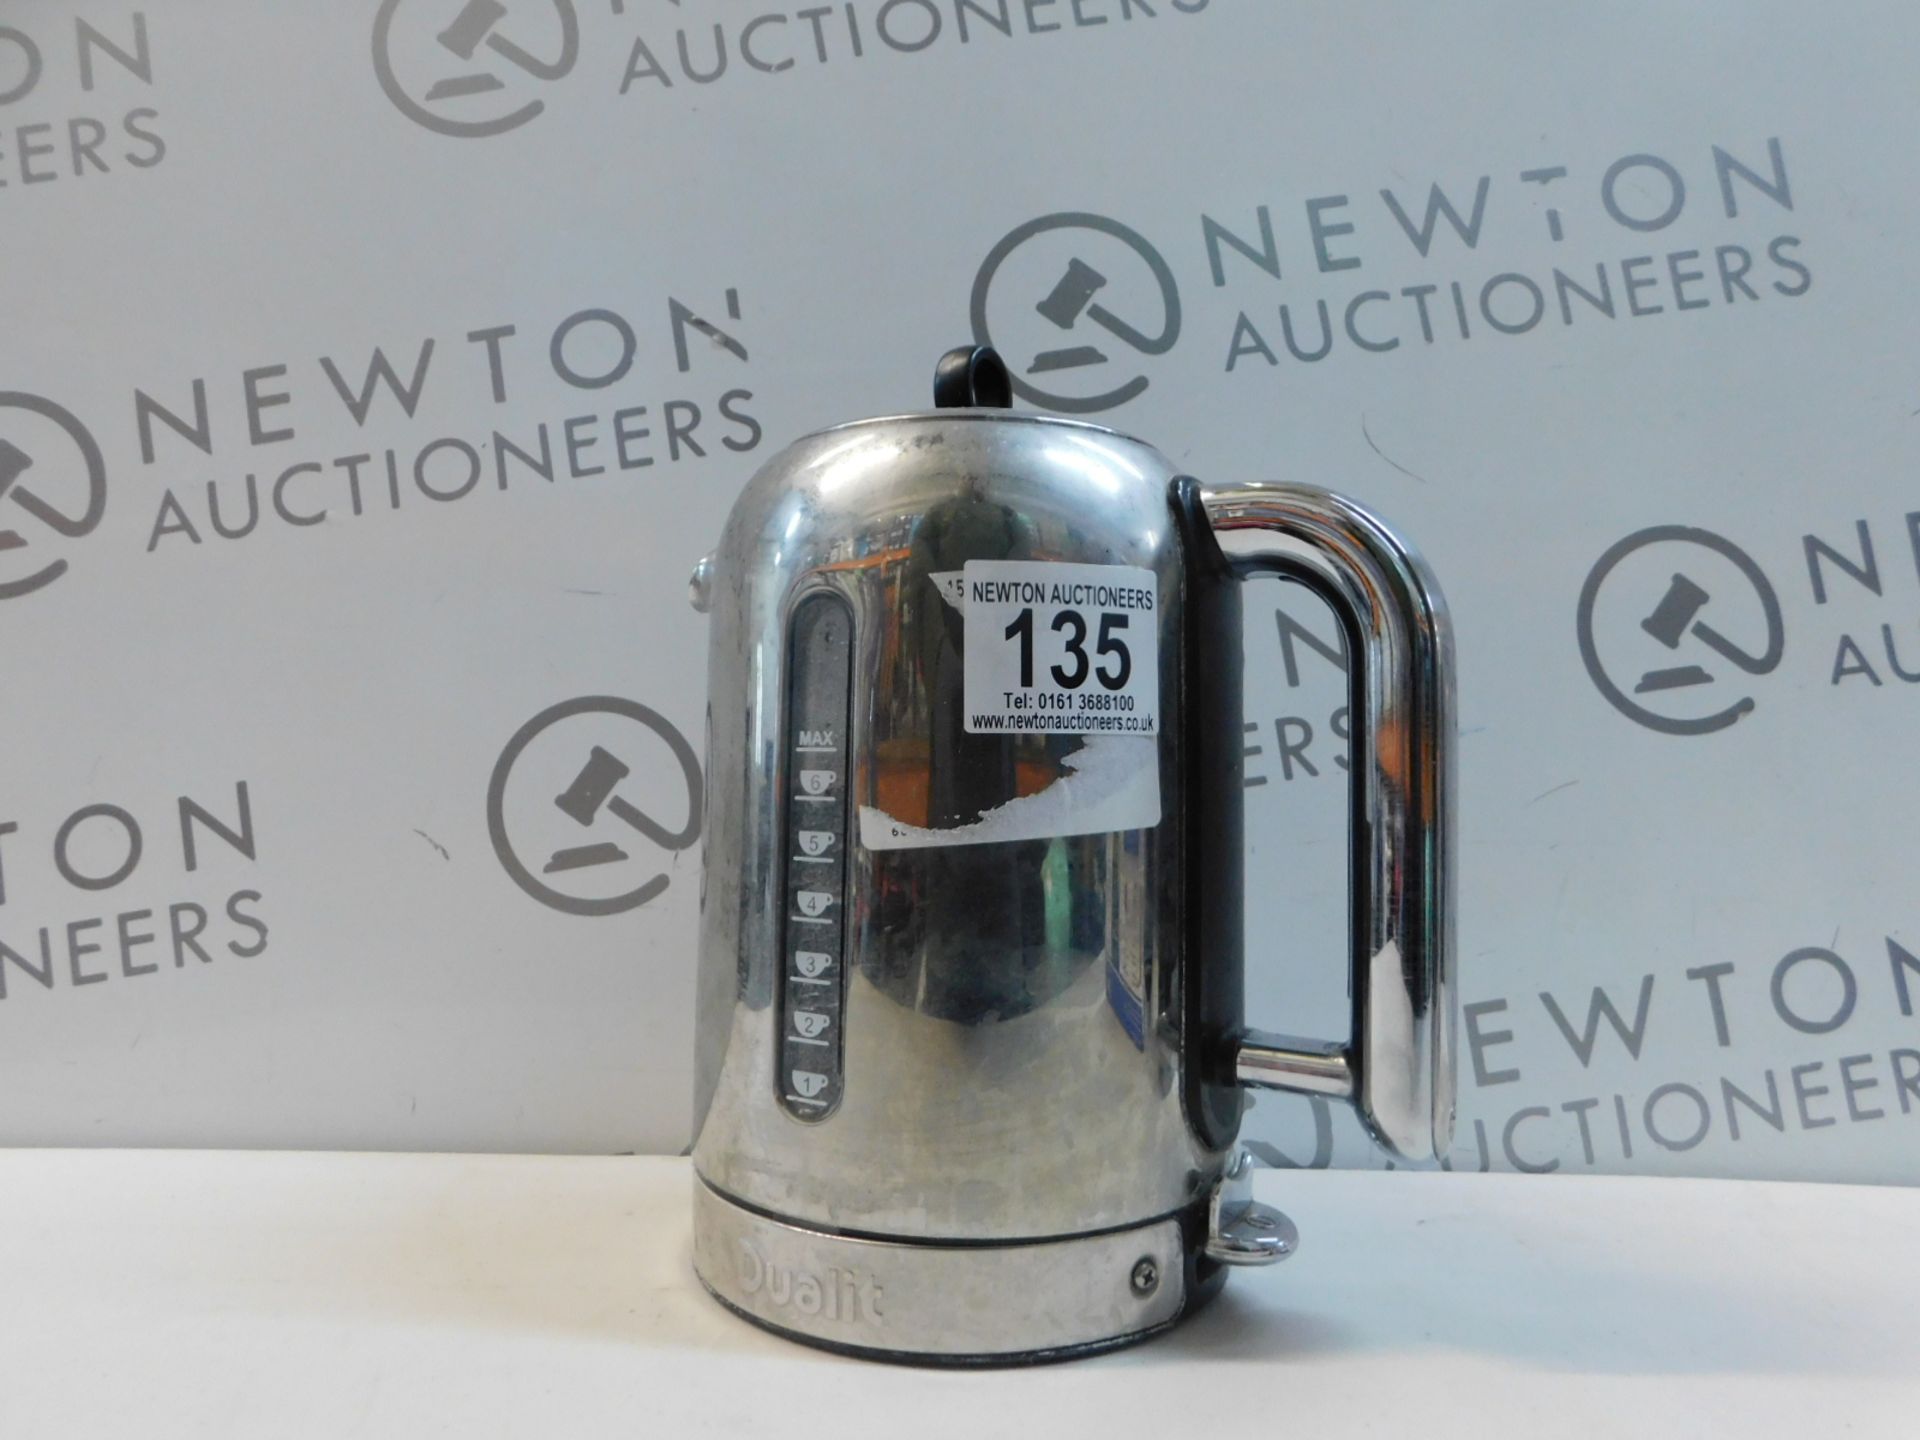 1 DUALIT POLISHED STAINLESS STEEL CLASSIC KETTLE 1.7L RRP Â£129.99 (NO BASE)